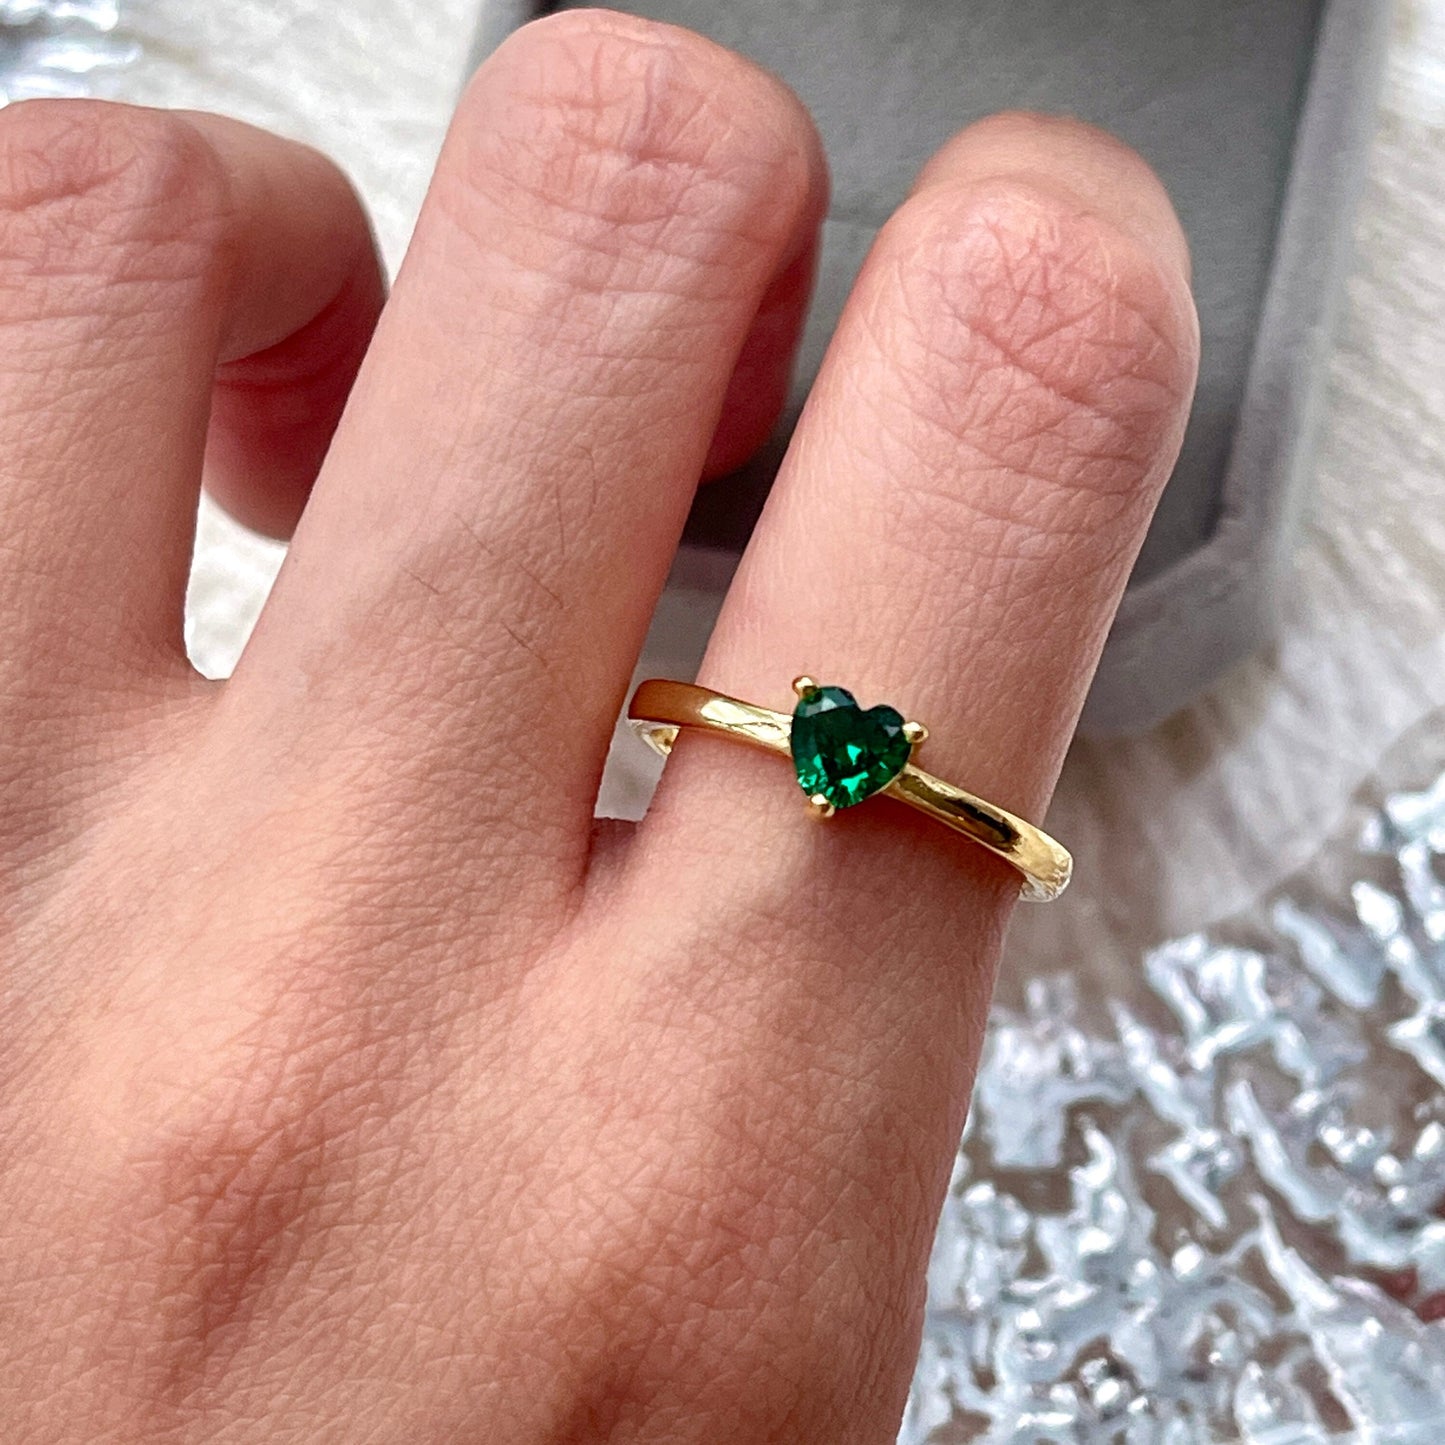 Heart shaped emerald gold ring, Dainty emerald ring, Romantic emerald ring, Green birthstone ring, Minimalist stacking ring, Delicate gifts